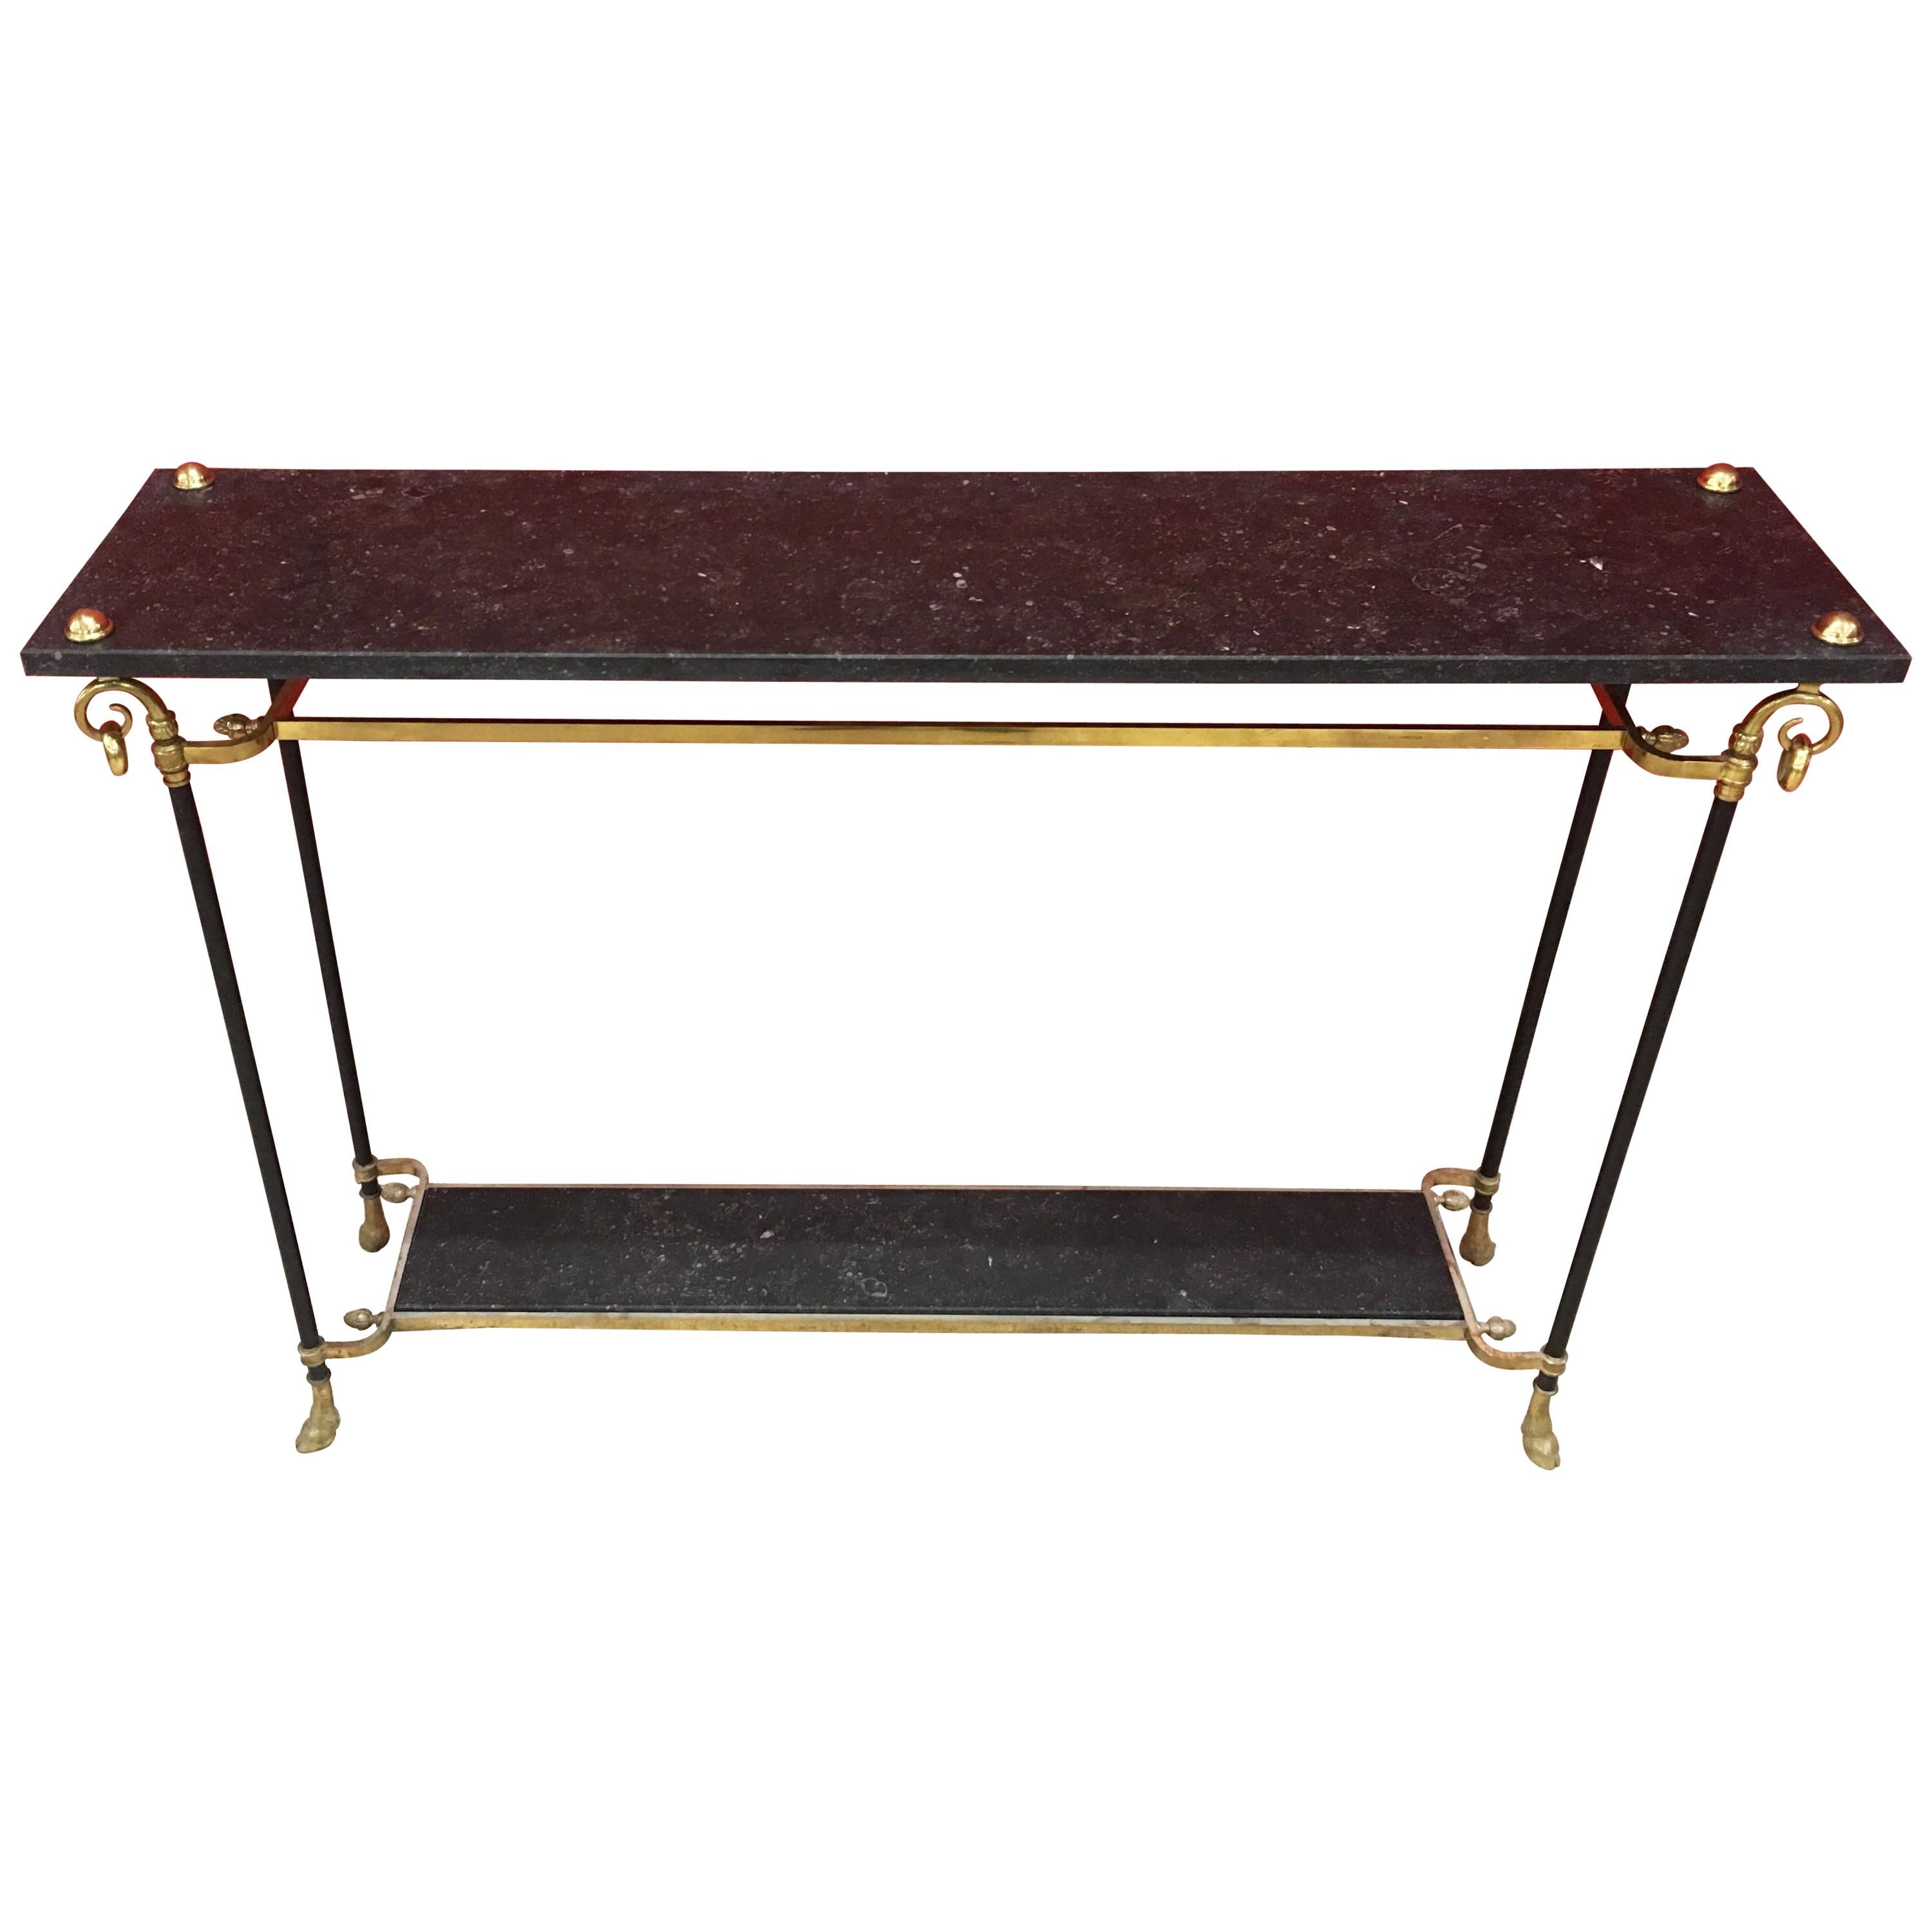 Maison Jansen, Elegant Console Table in Bronze, Brass and Marble, circa 1950